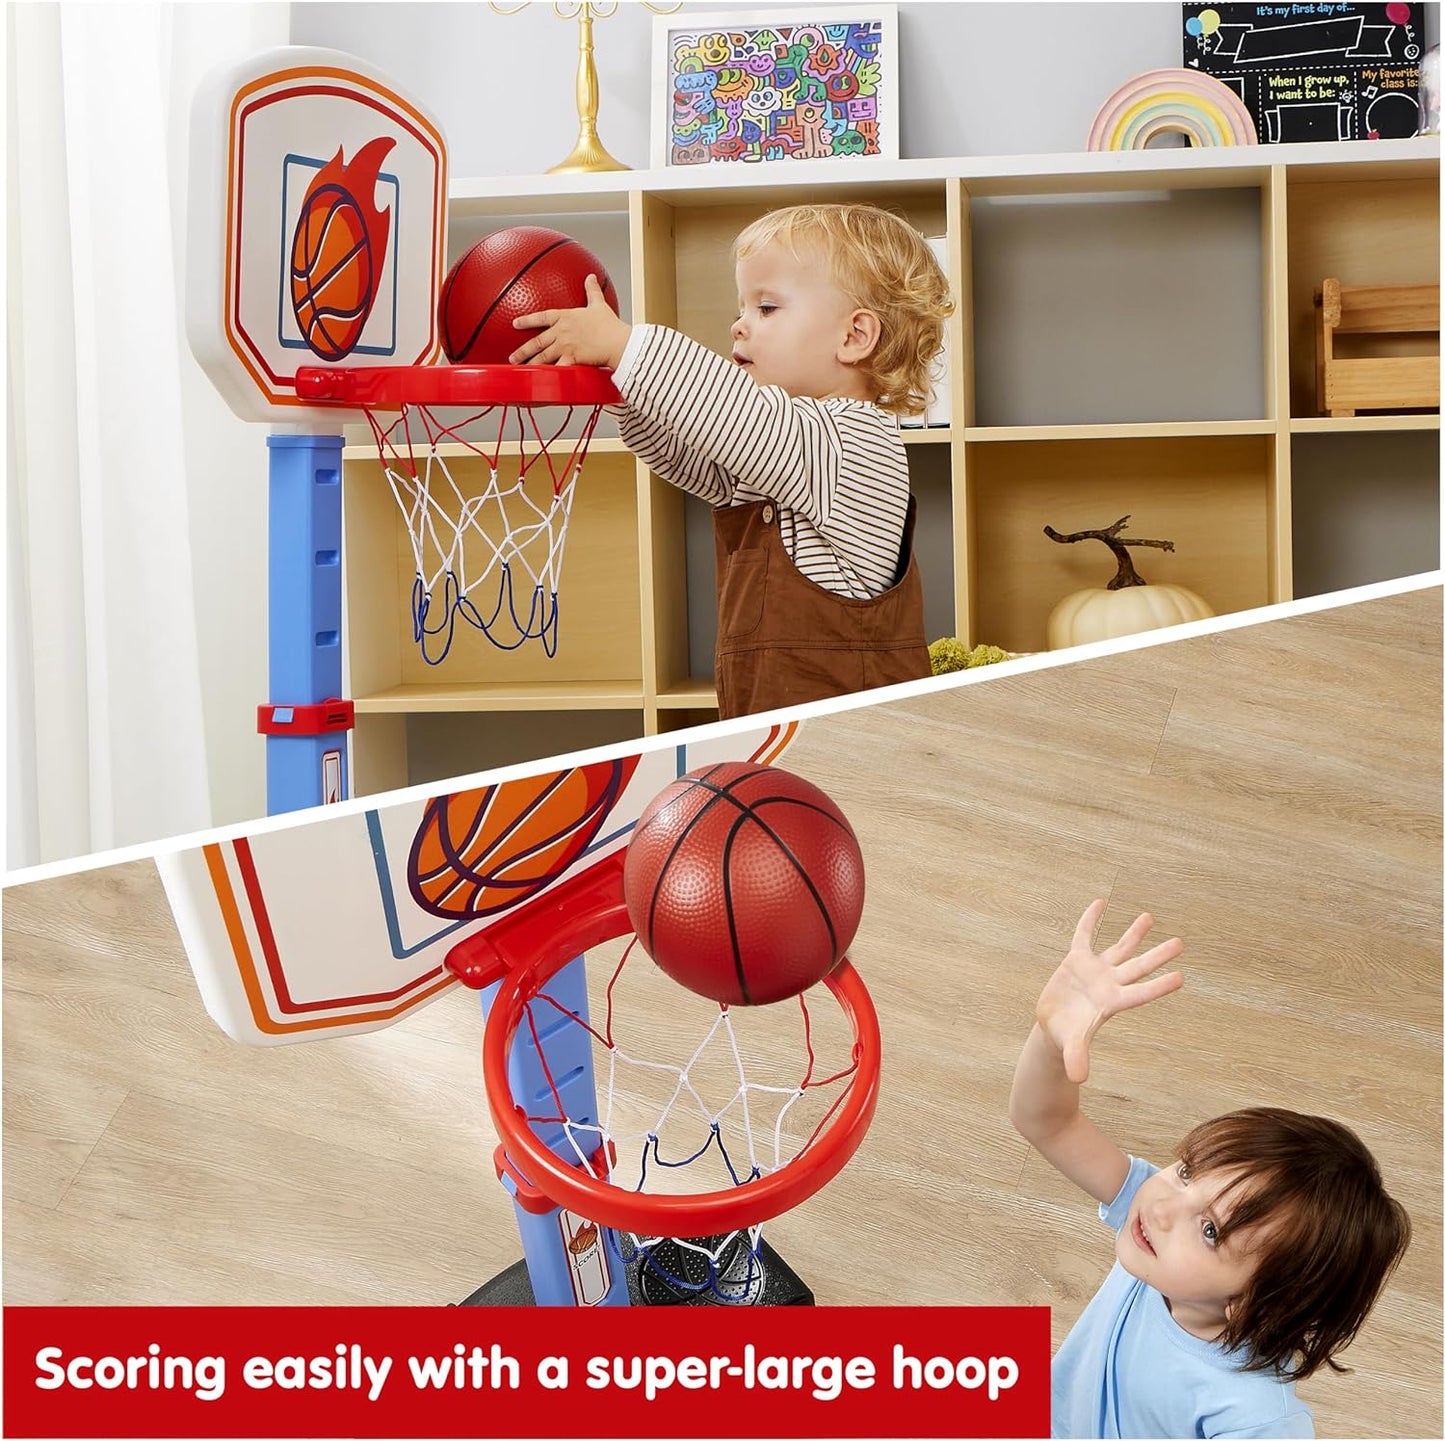 Toddler Basketball Arcade Game Set, Adjustable Basketball Goal with 4 Balls for Kids Indoor Outdoor Play, Carnival Games, Christmas Birthday Gift for Boys Girls Age 1 and up - Air Pump Included